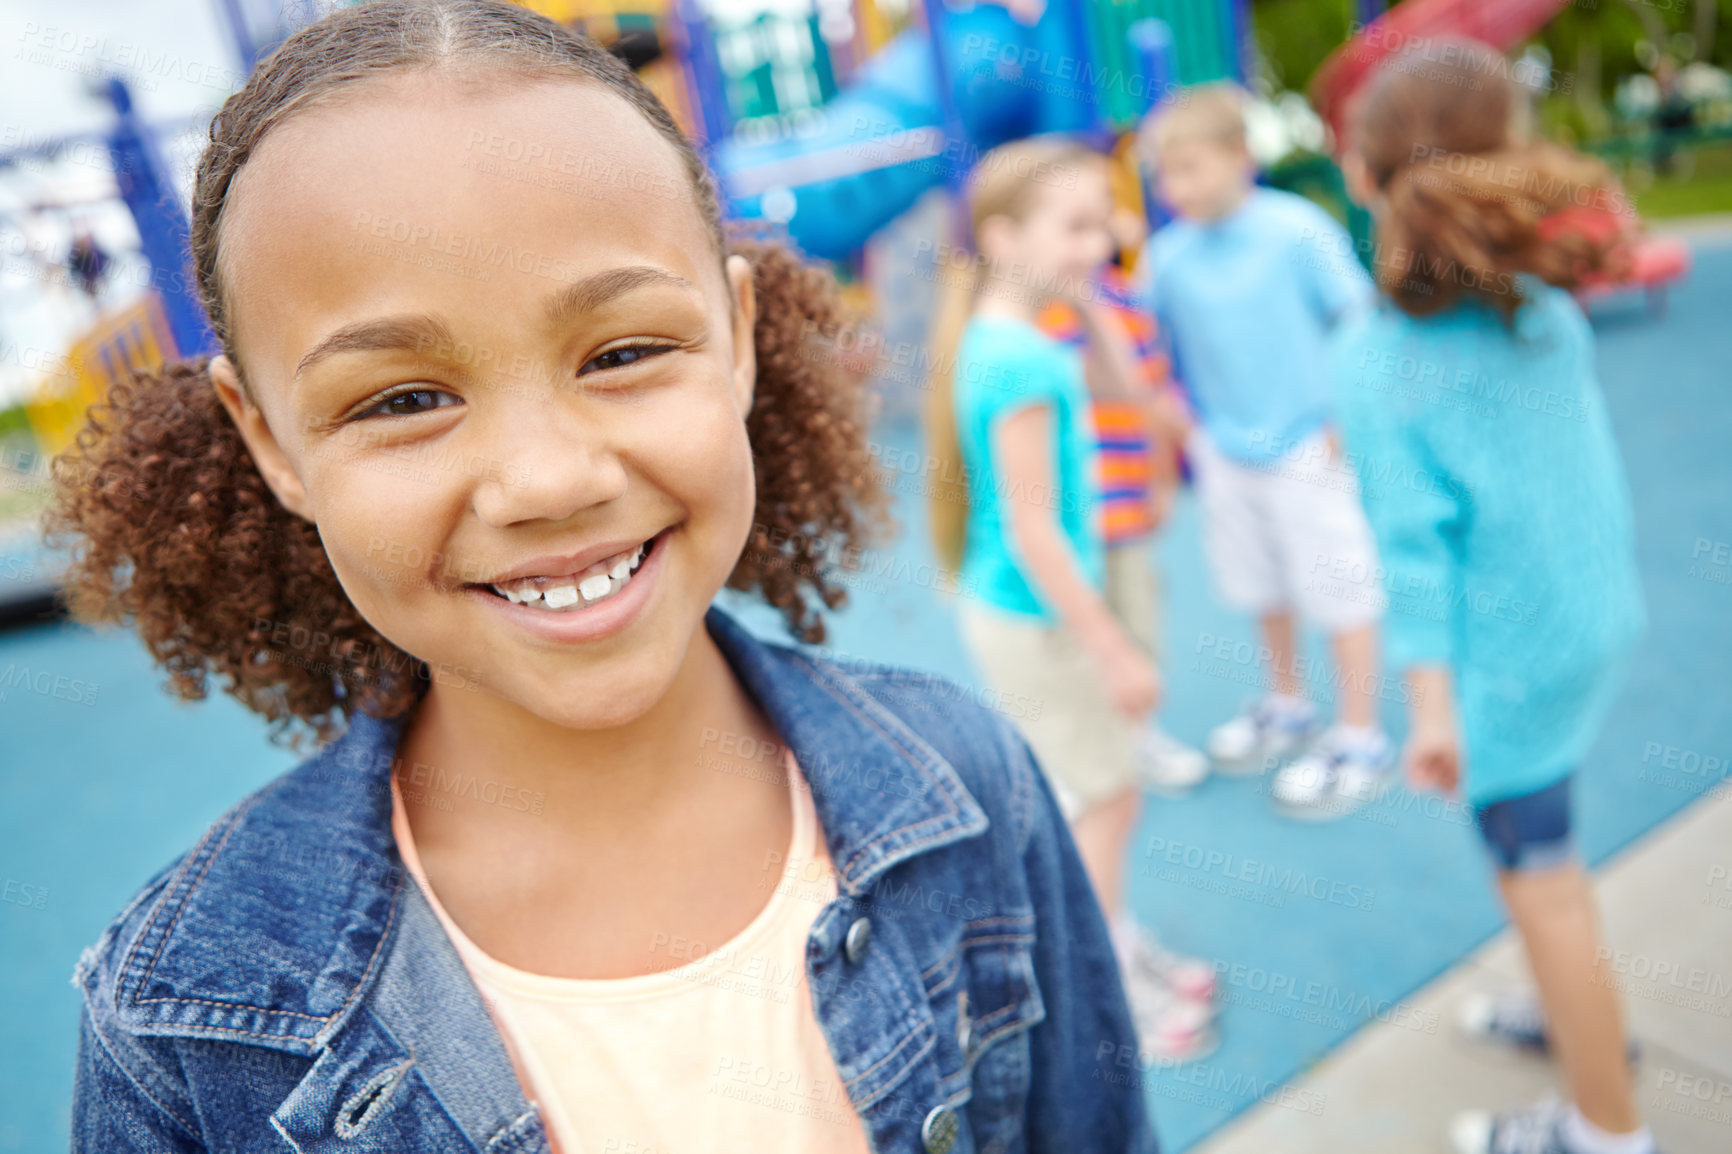 Buy stock photo A young girl smiling at the camera while her friends play behind her in a play park